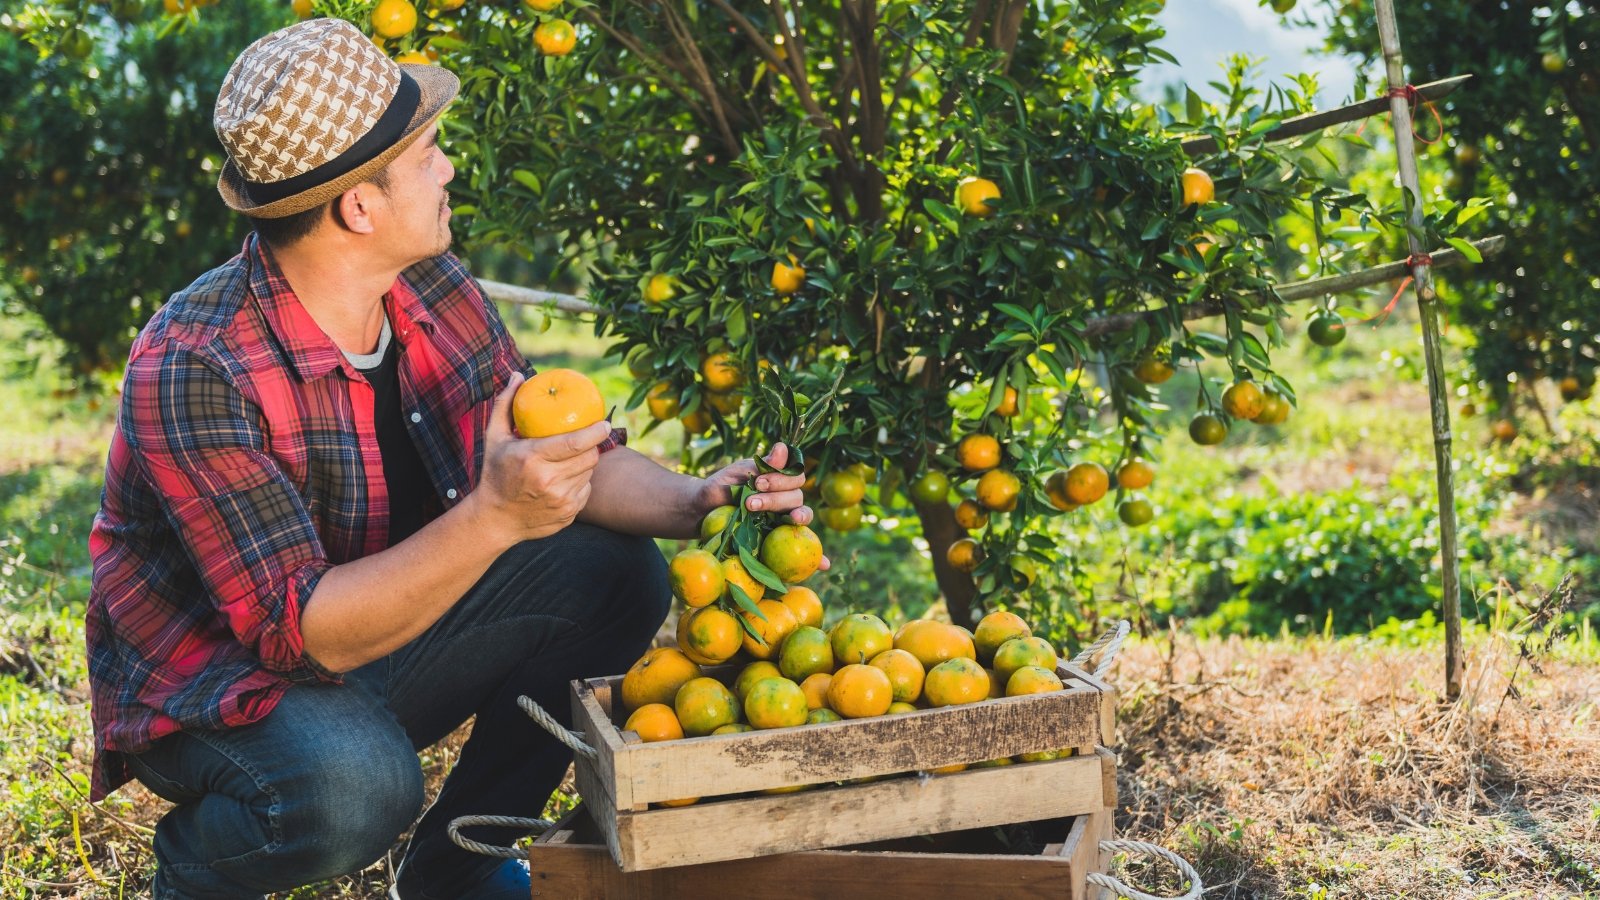 Close-up of a man dressed in a red checkered shirt and a Panama hat harvesting ripe oranges in wooden boxes from a tree in the garden.